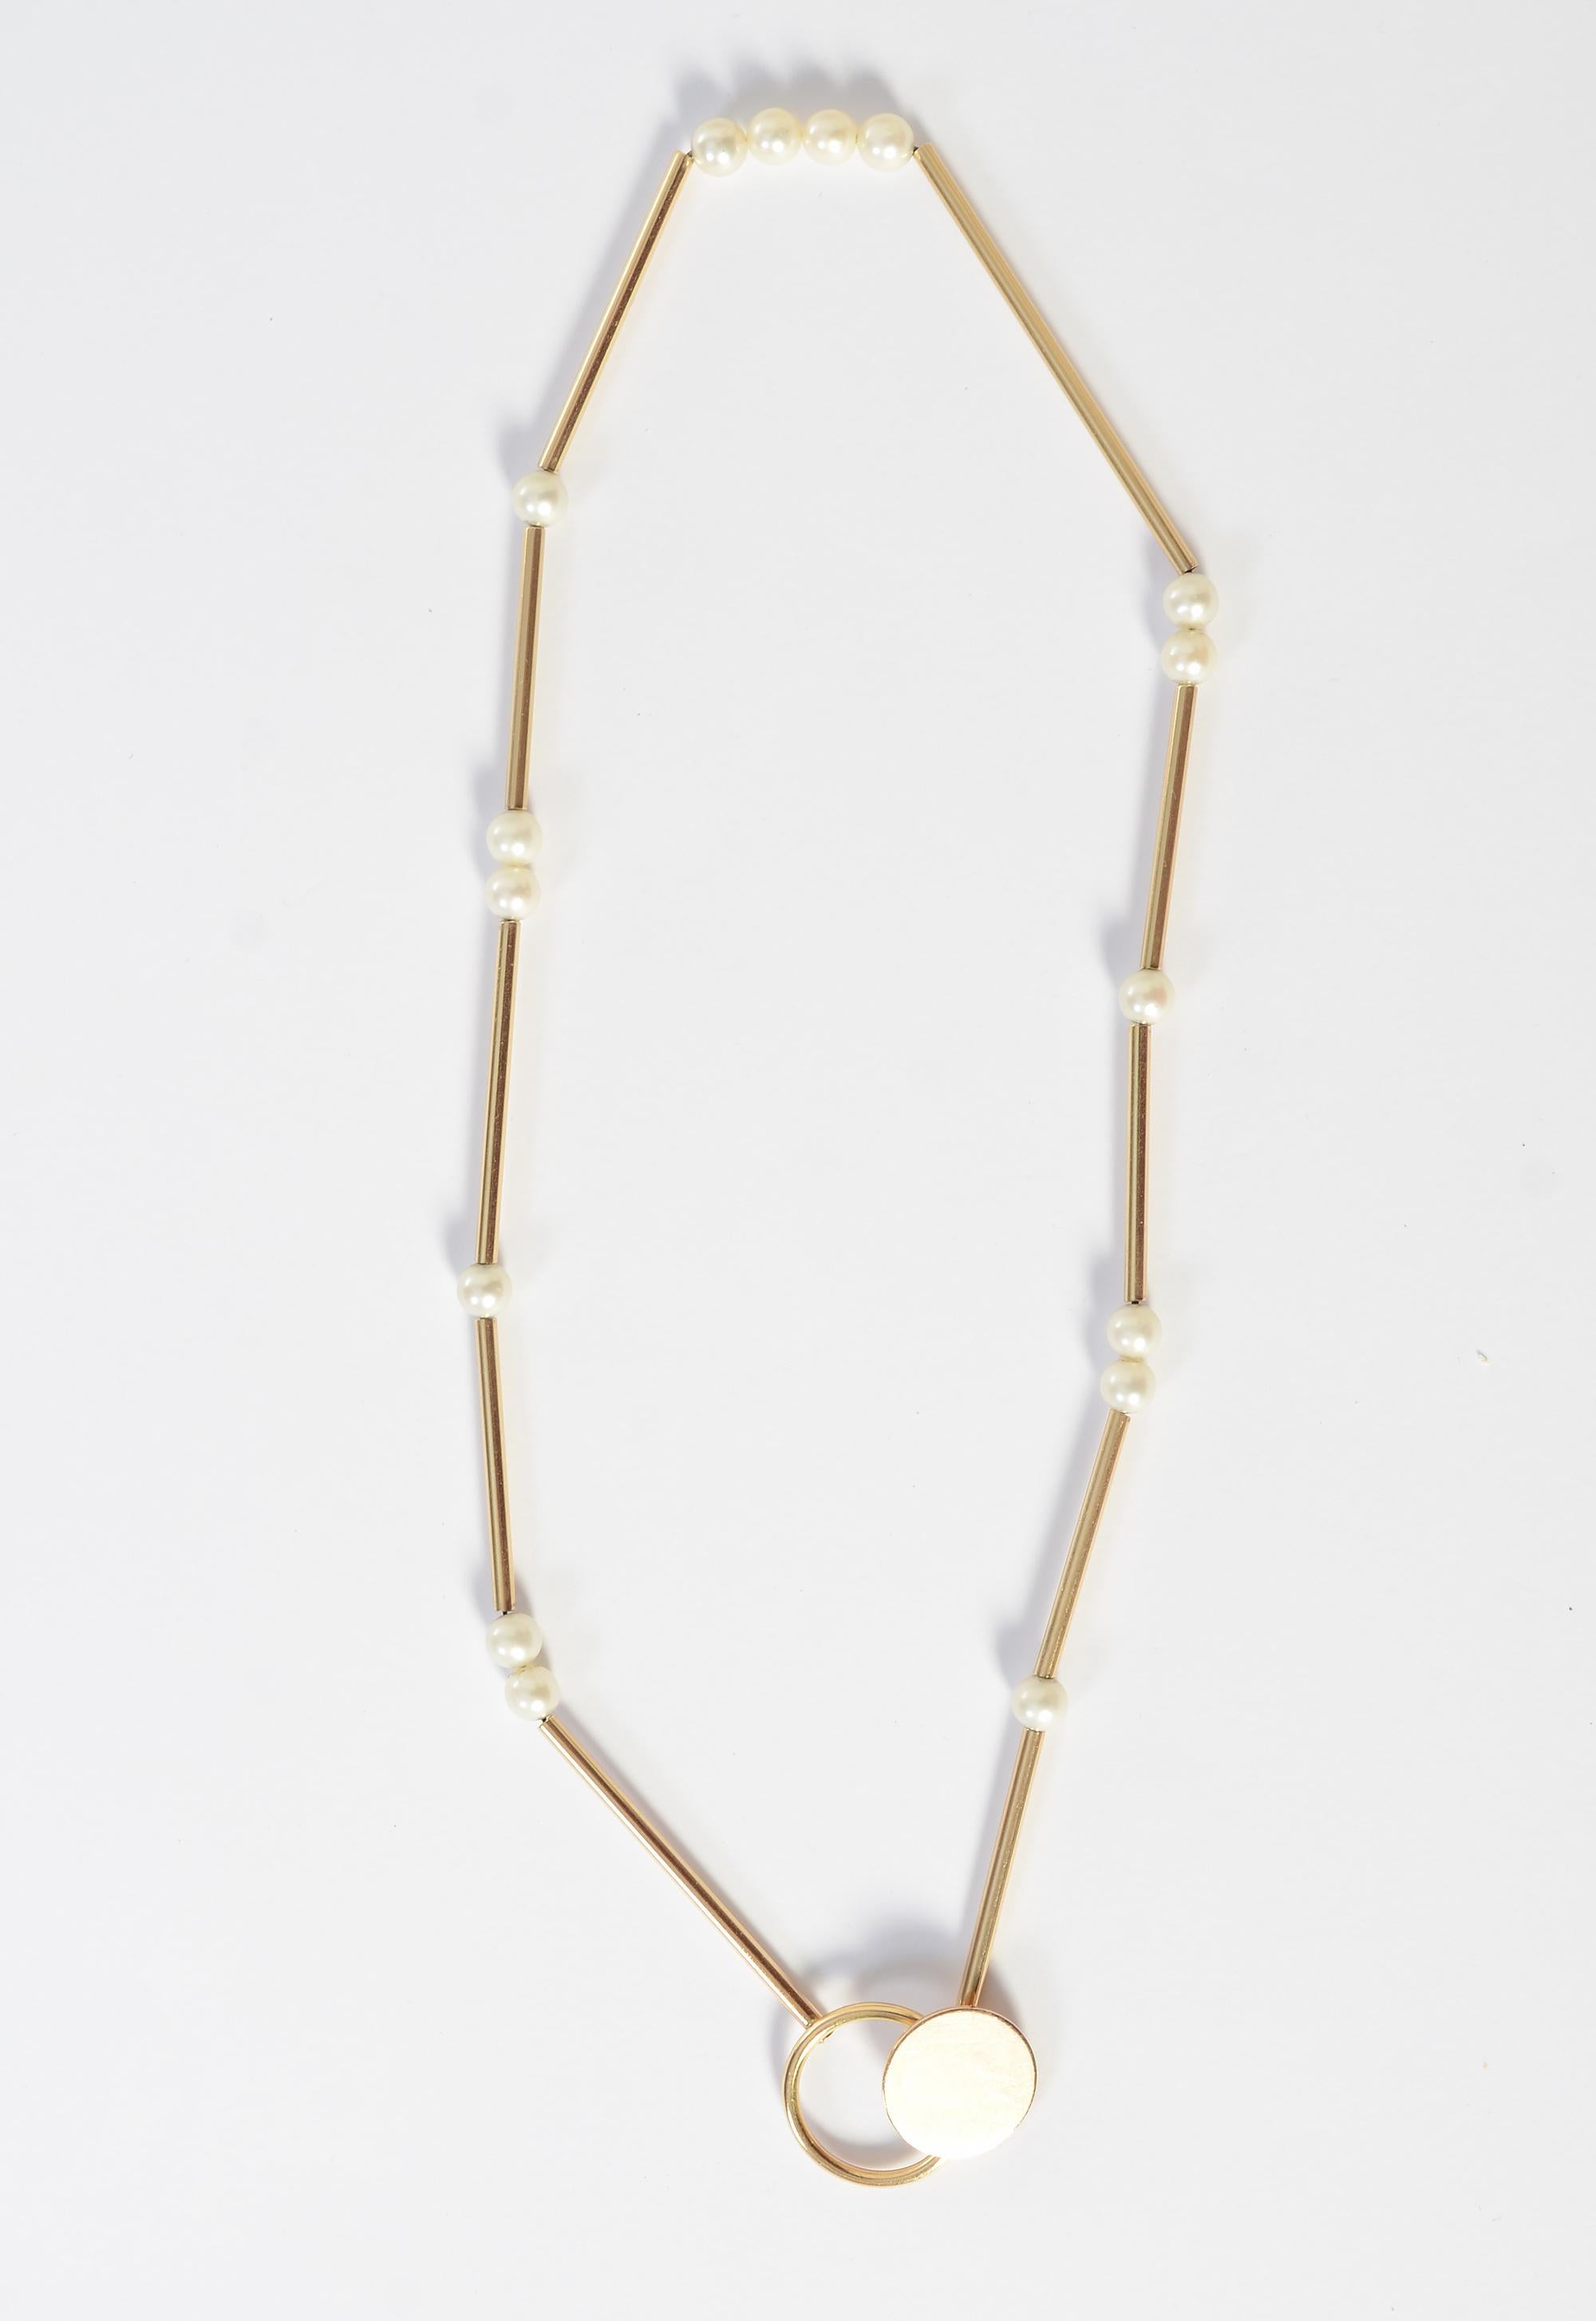 Gold and pearl choker necklace by Betty Cooke. Ninety six year old Betty Cooke is considered one of the icons of the Modernist studio jewelry movement. Her work is in the permanent collections of the Museum of Modern Art; Museum of Arts and Design